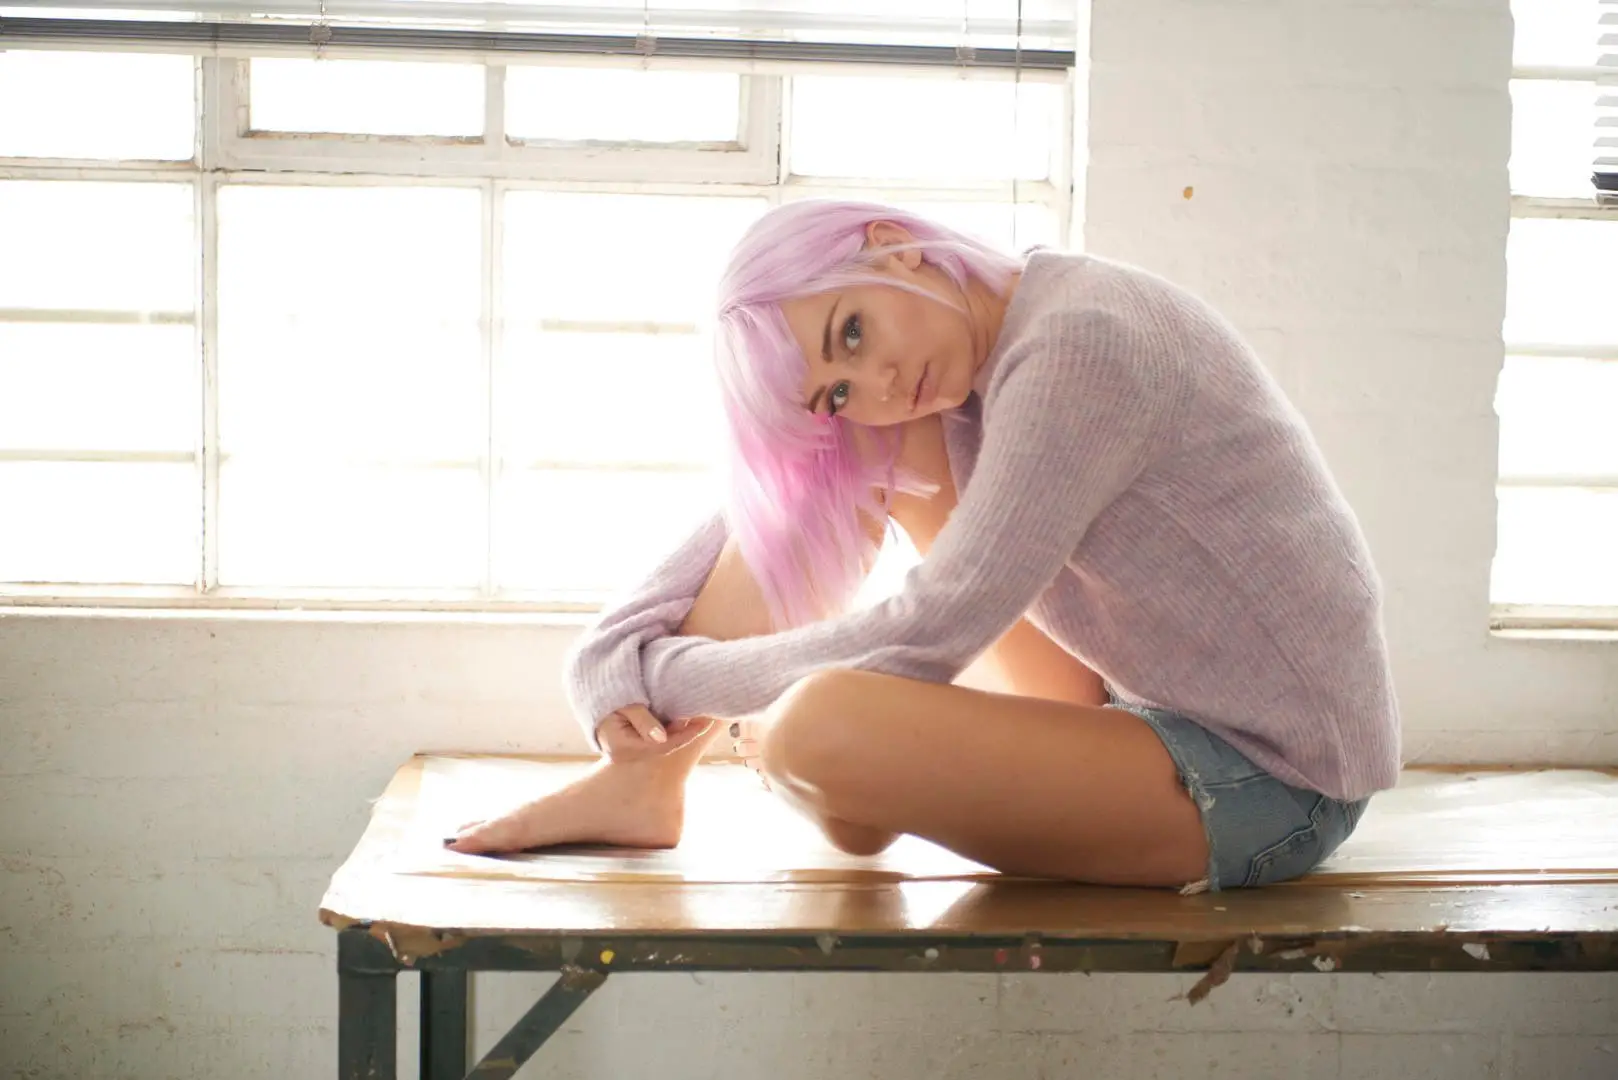 Black Mirror's Ashley O (portrayed by Miley Cyrus) sitting down with a pink wig on